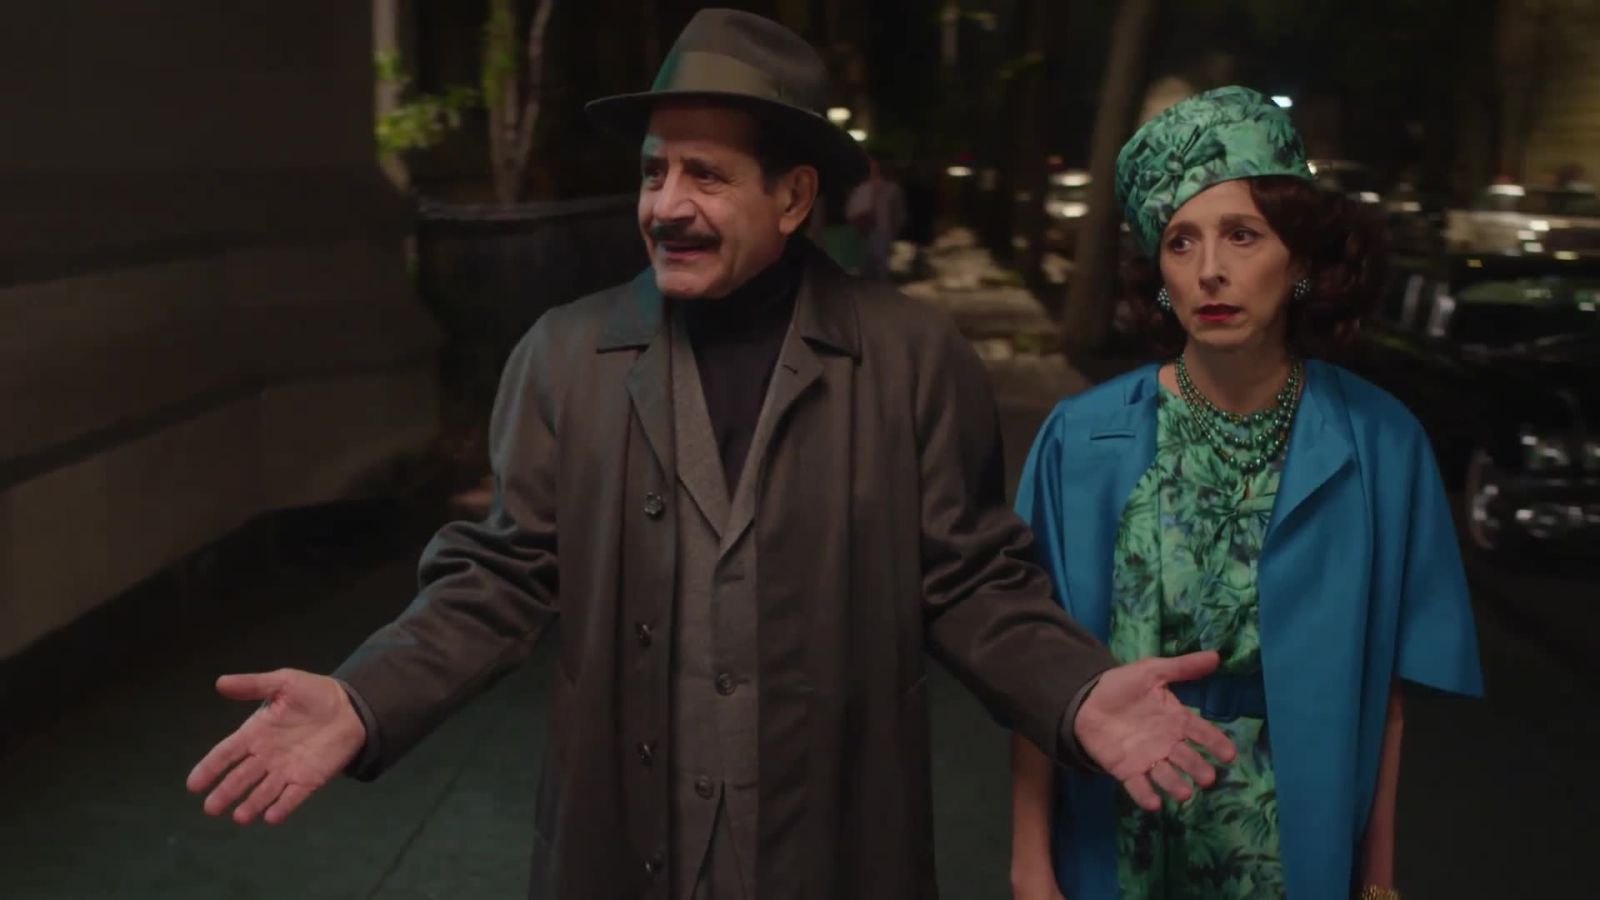 The Marvelous Mrs. Maisel: The Cab Hunt